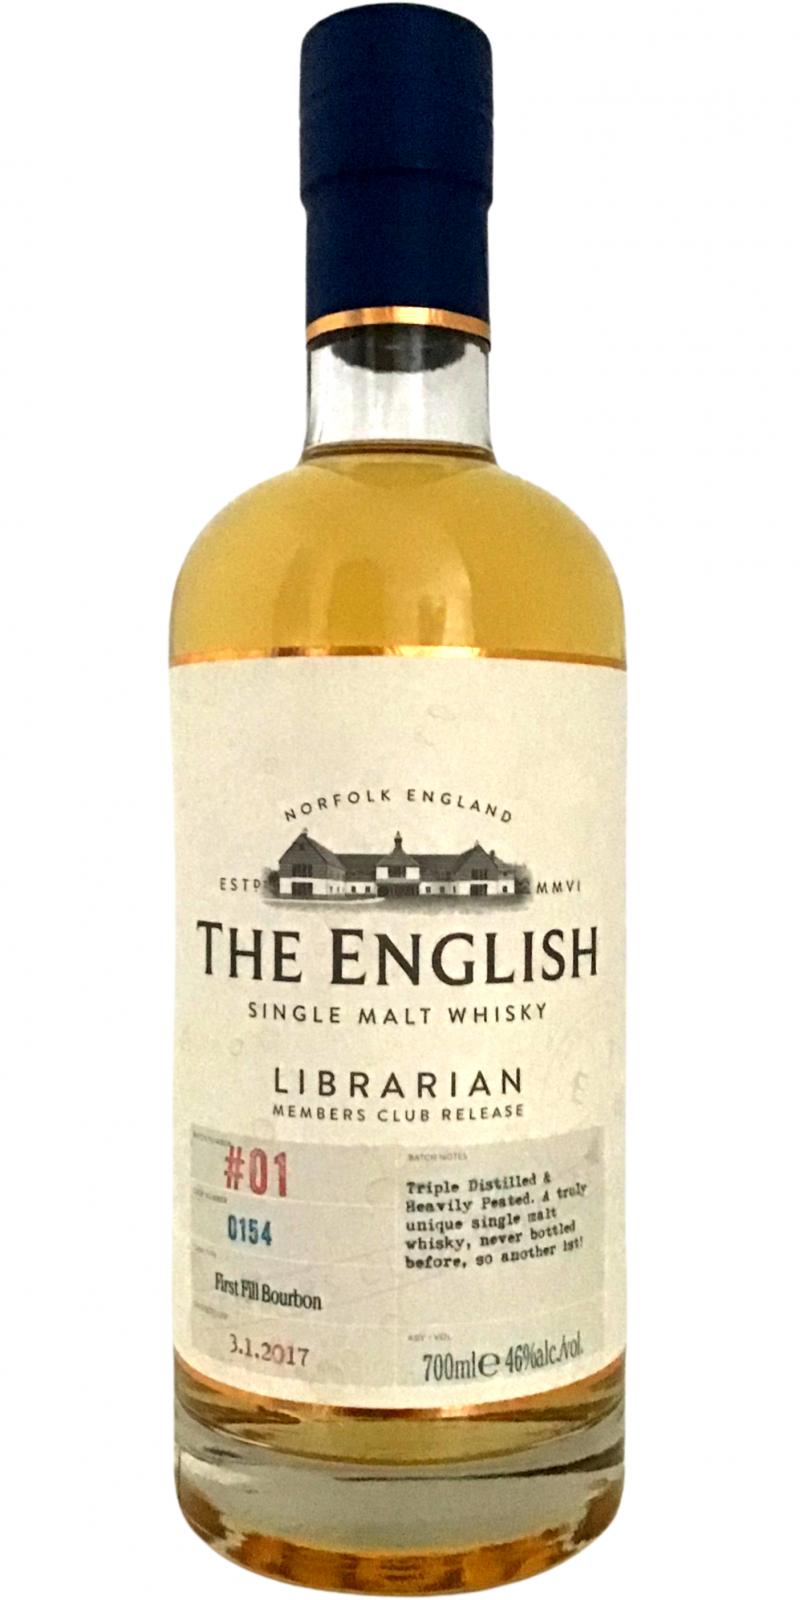 The English Whisky Members Club Release Batch #01